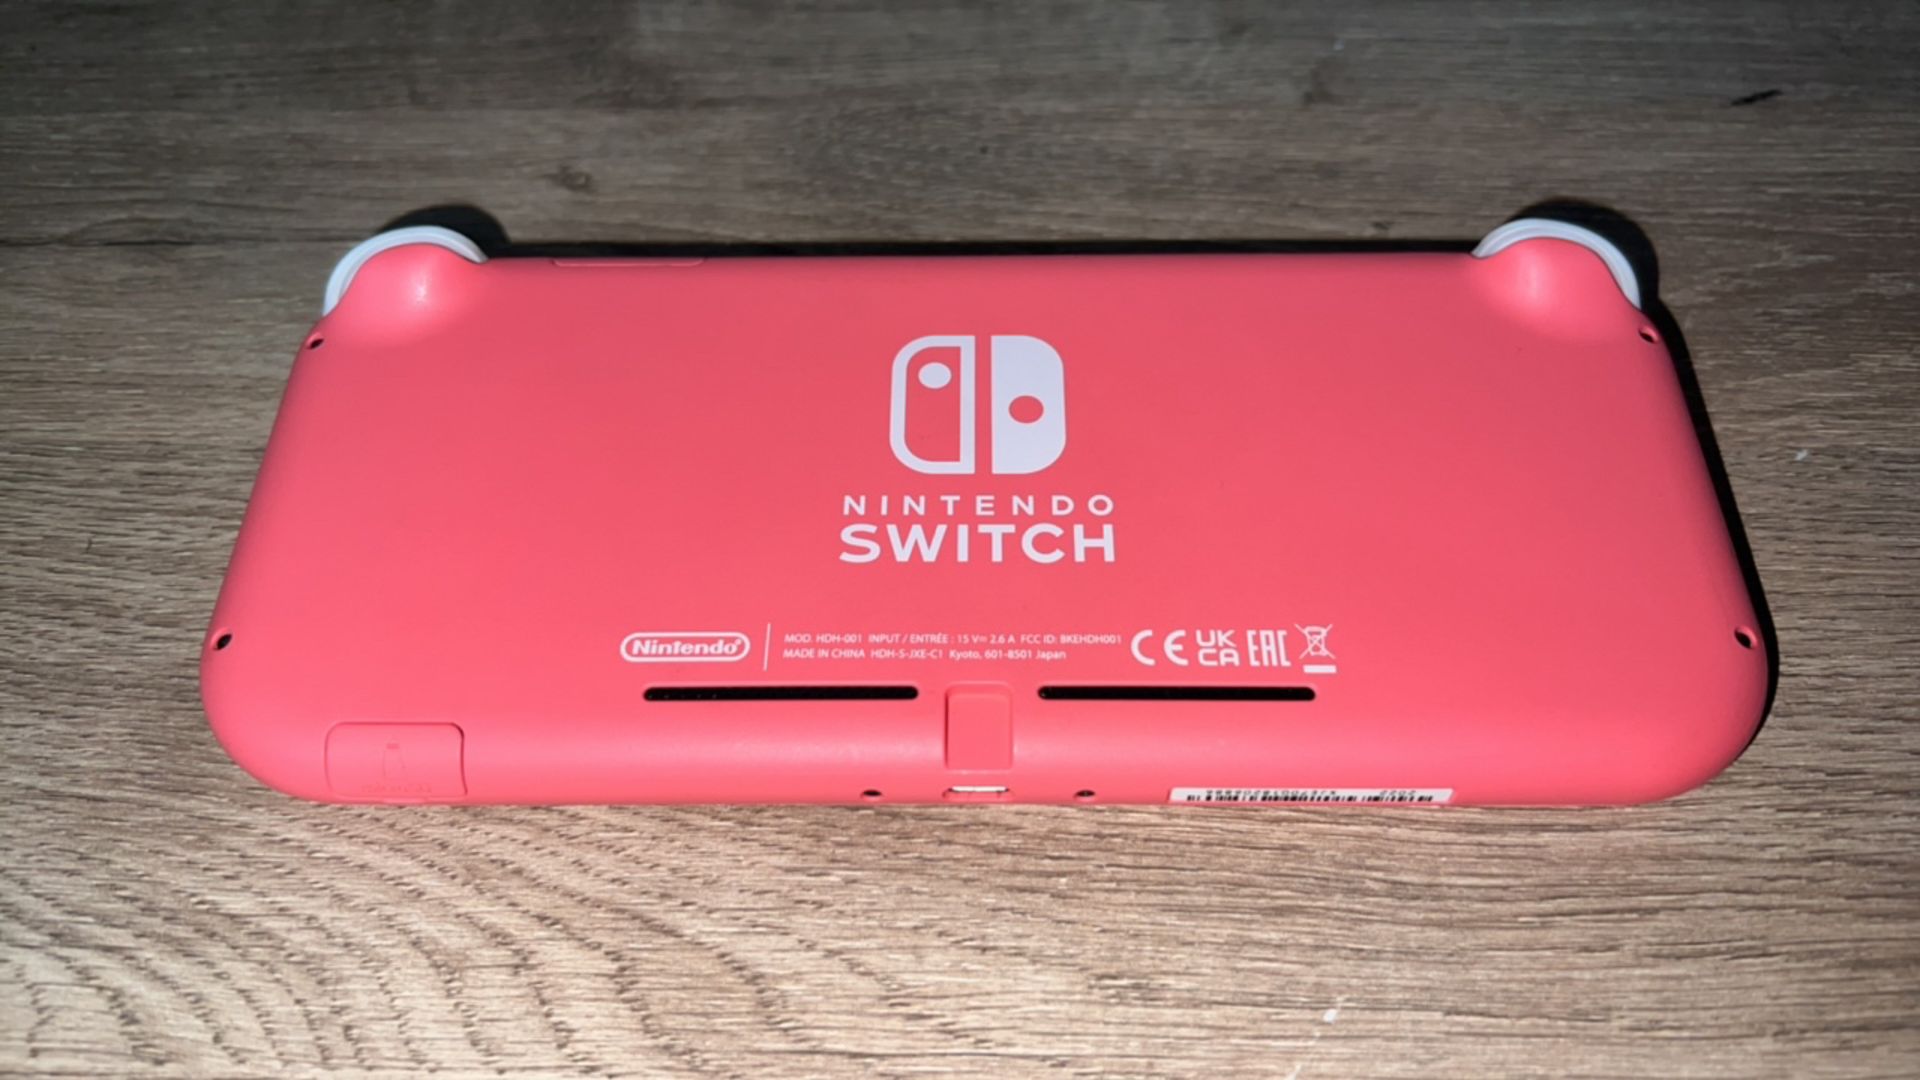 NINTENDO SWITCH LITE CONSOLE - CORAL - Image 4 of 5